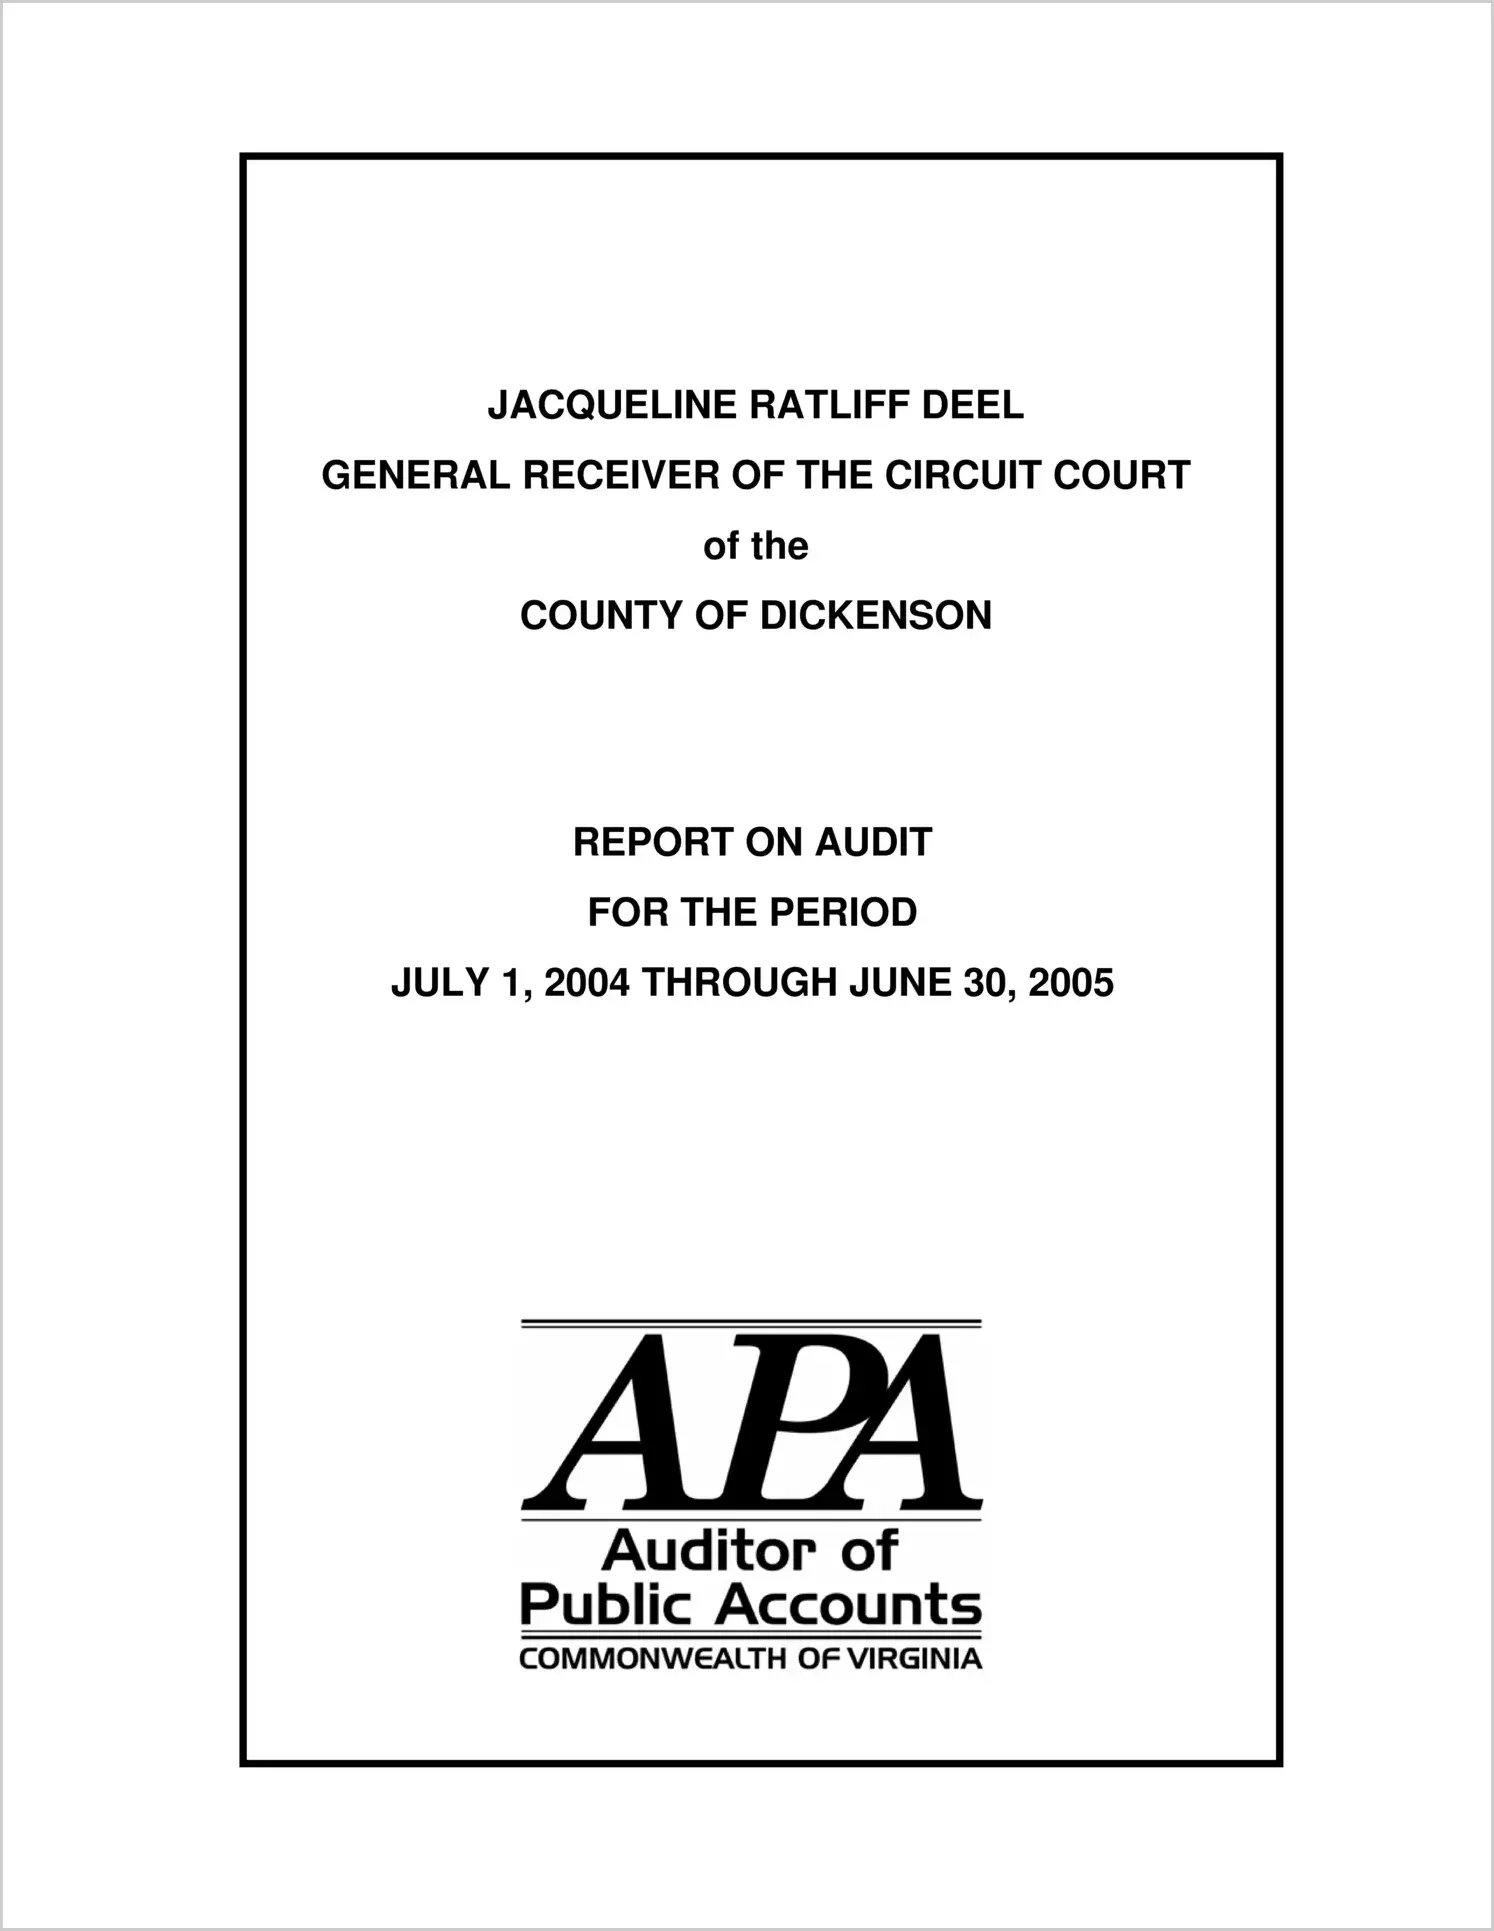 General Receiver of the Circuit Court of the County of Dickenson for the period July 2, 2004 through June 30, 2005